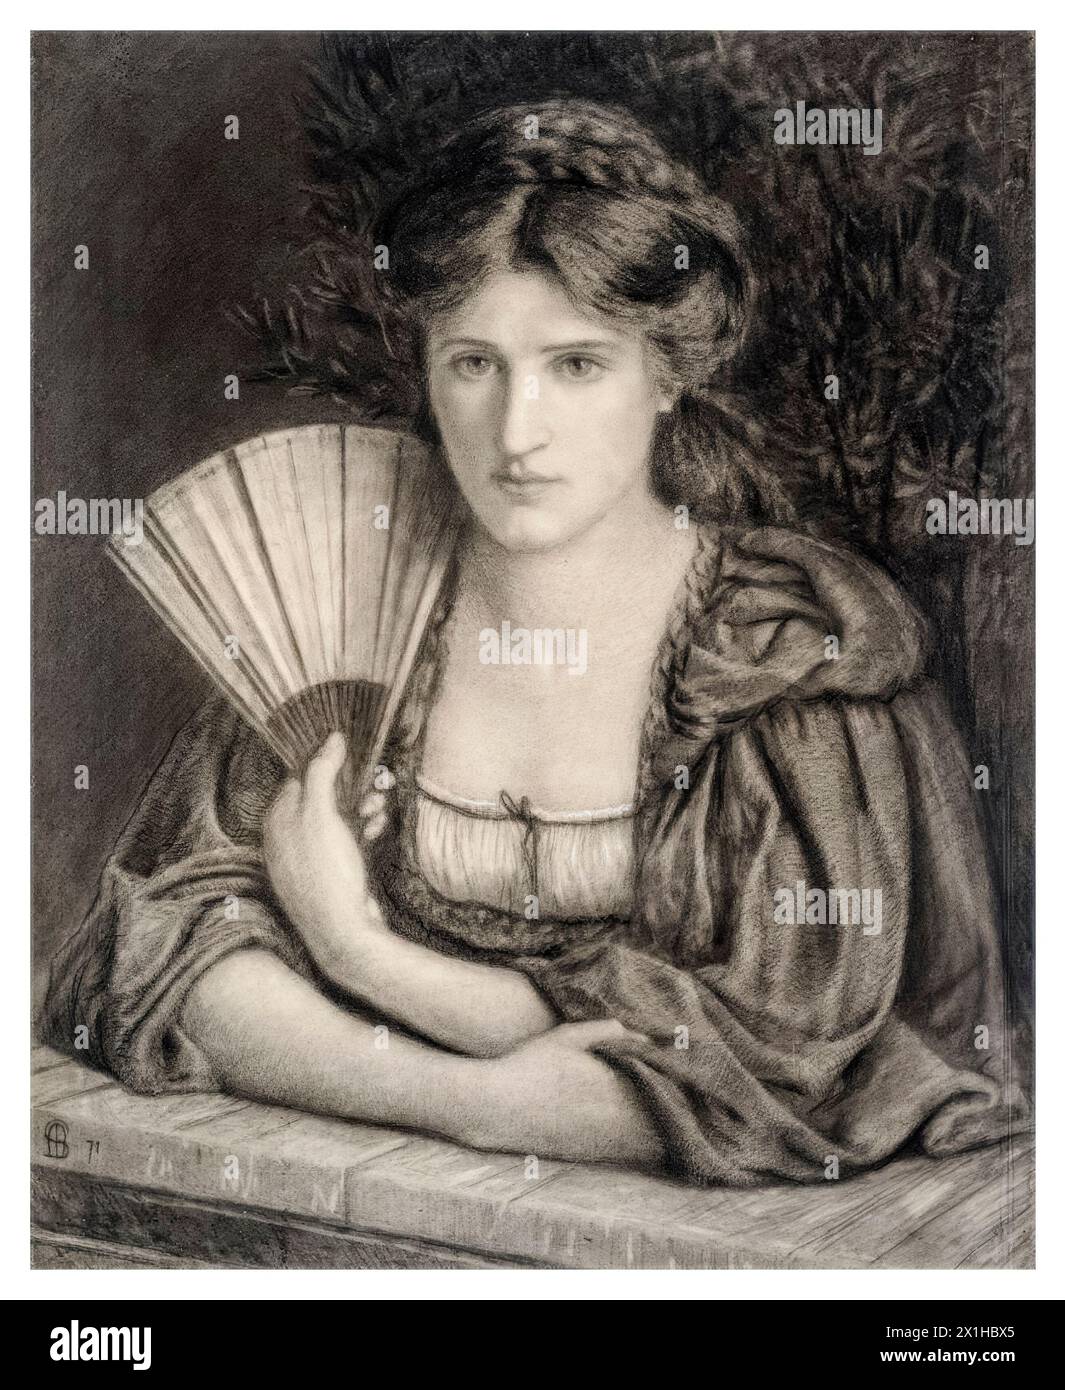 Marie Spartali Stillman (1844-1927), Self-Portrait drawing of the British Pre-Raphaelite painter in charcoal and chalk, 1871 Stock Photo